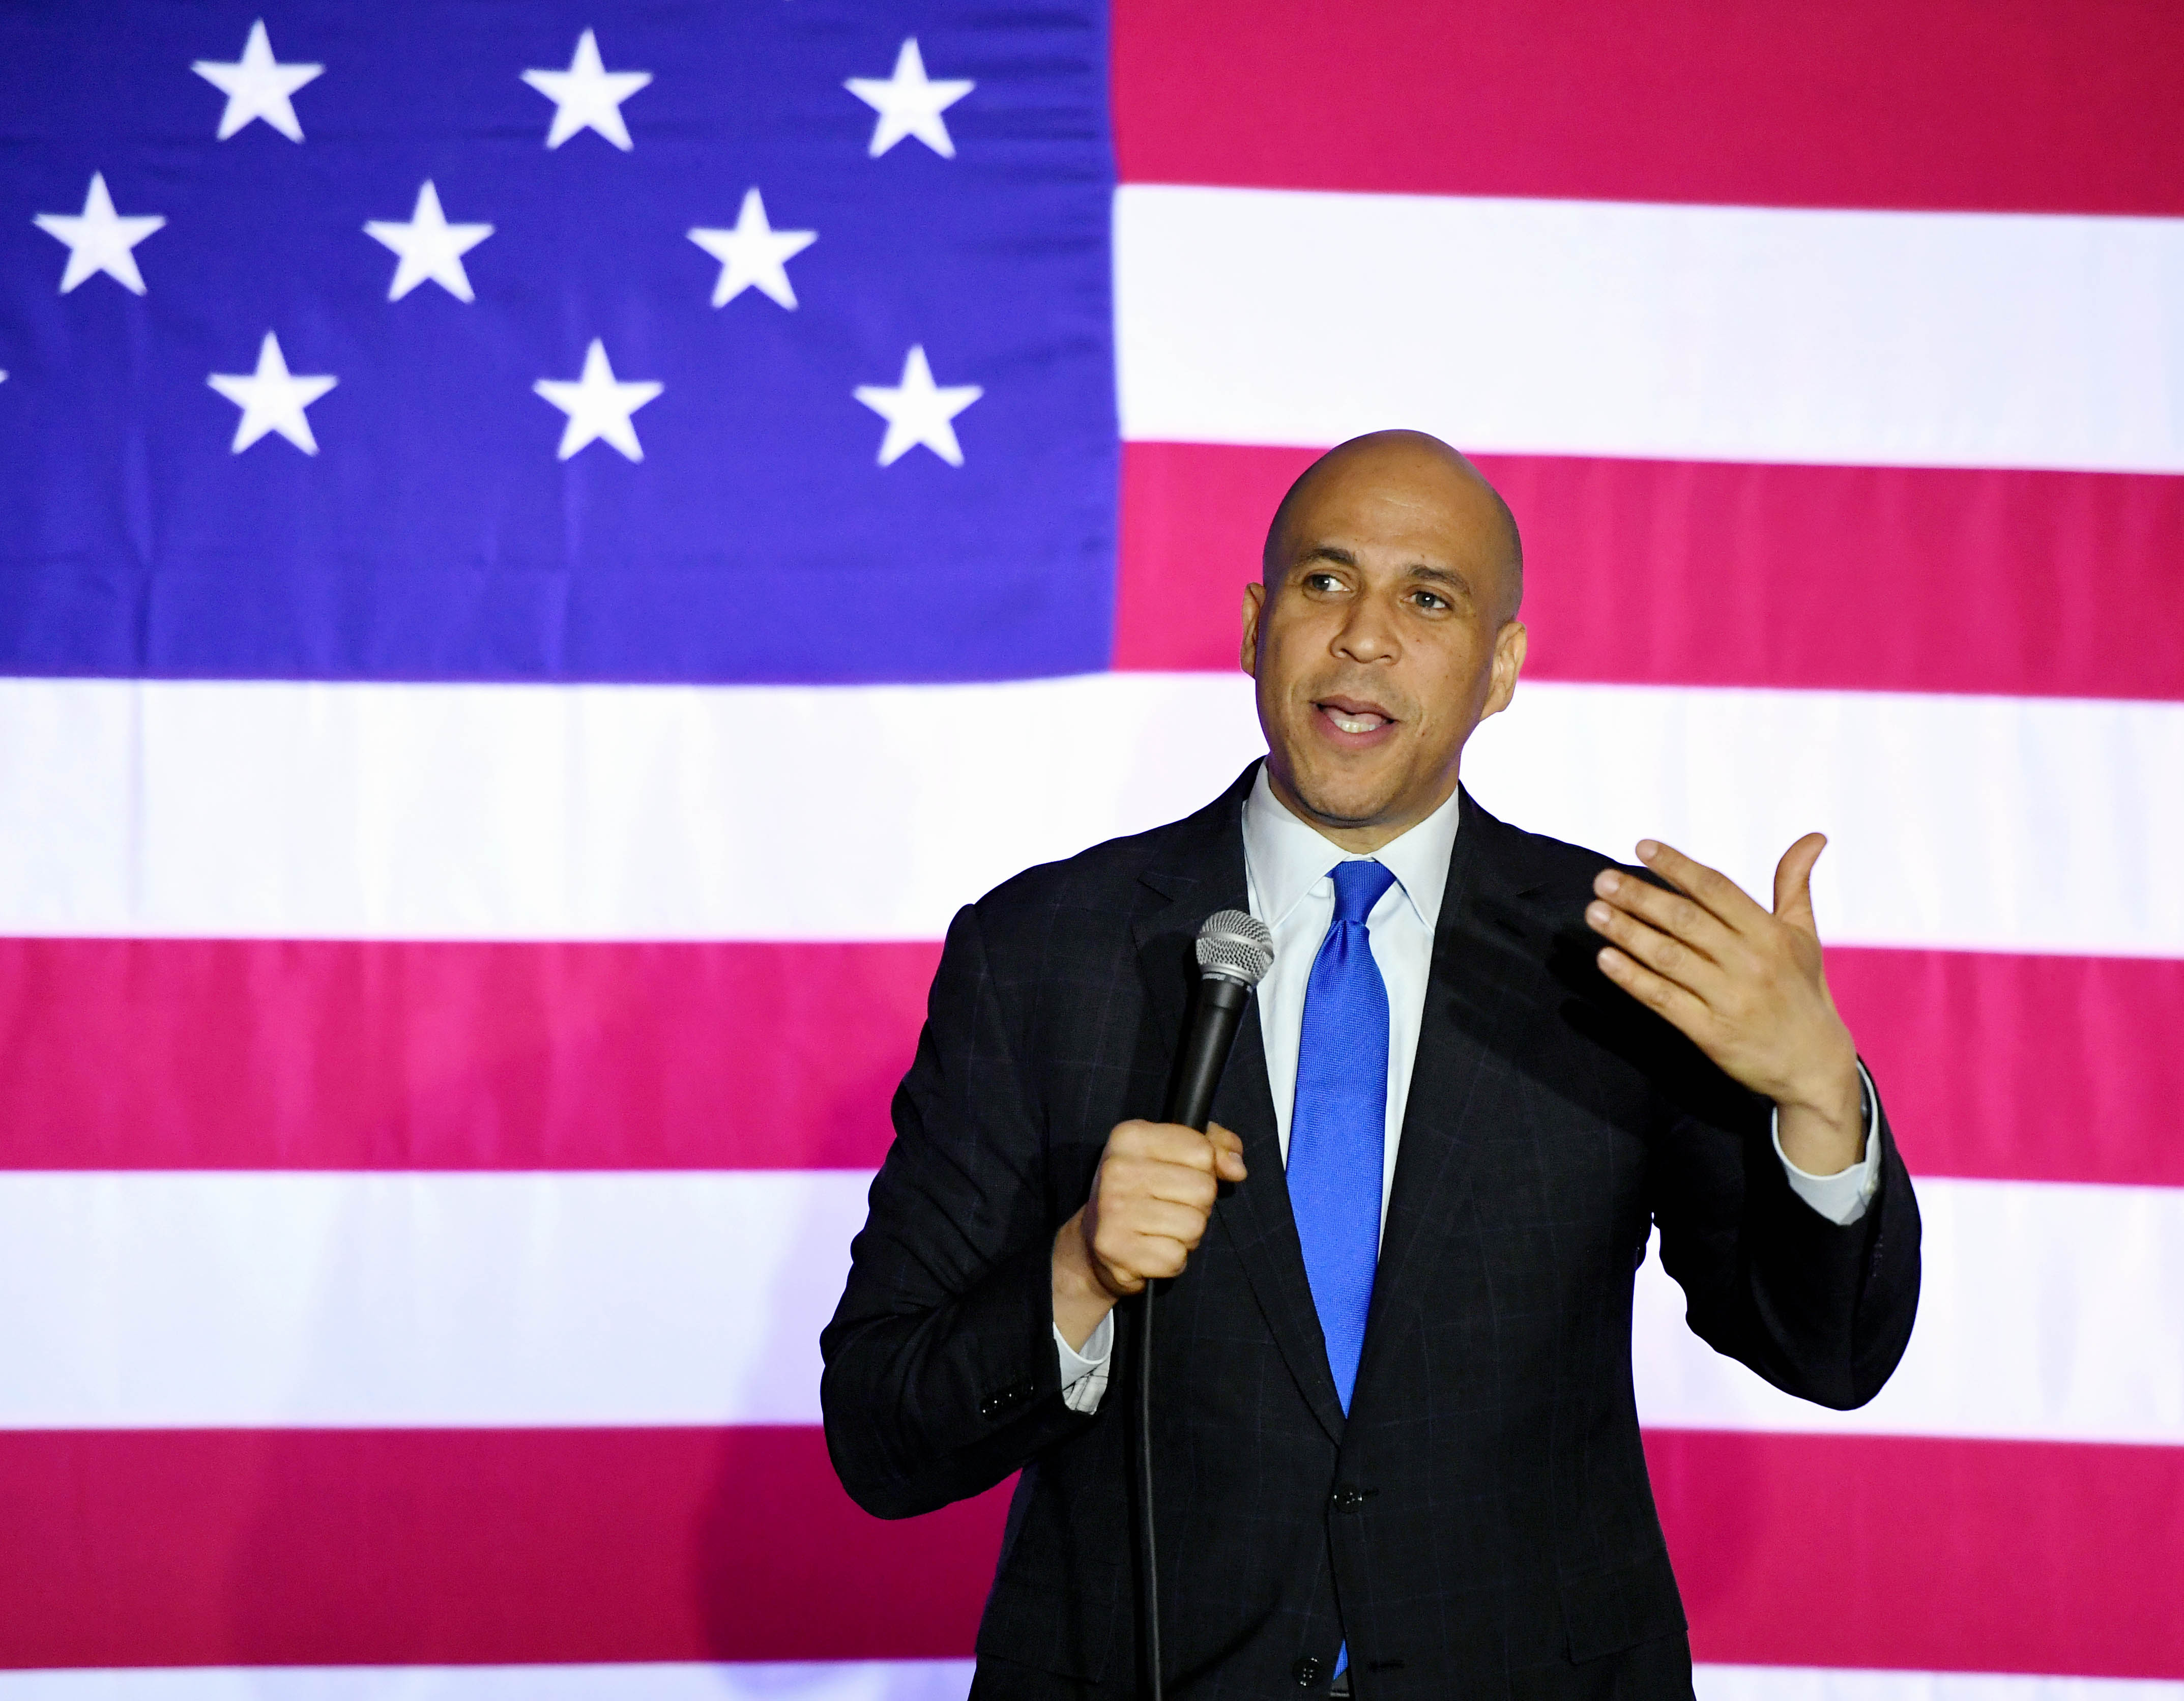 Cory Booker On Juneteenth And Honoring Our Ancestors: 'We Must Pay It Forward'